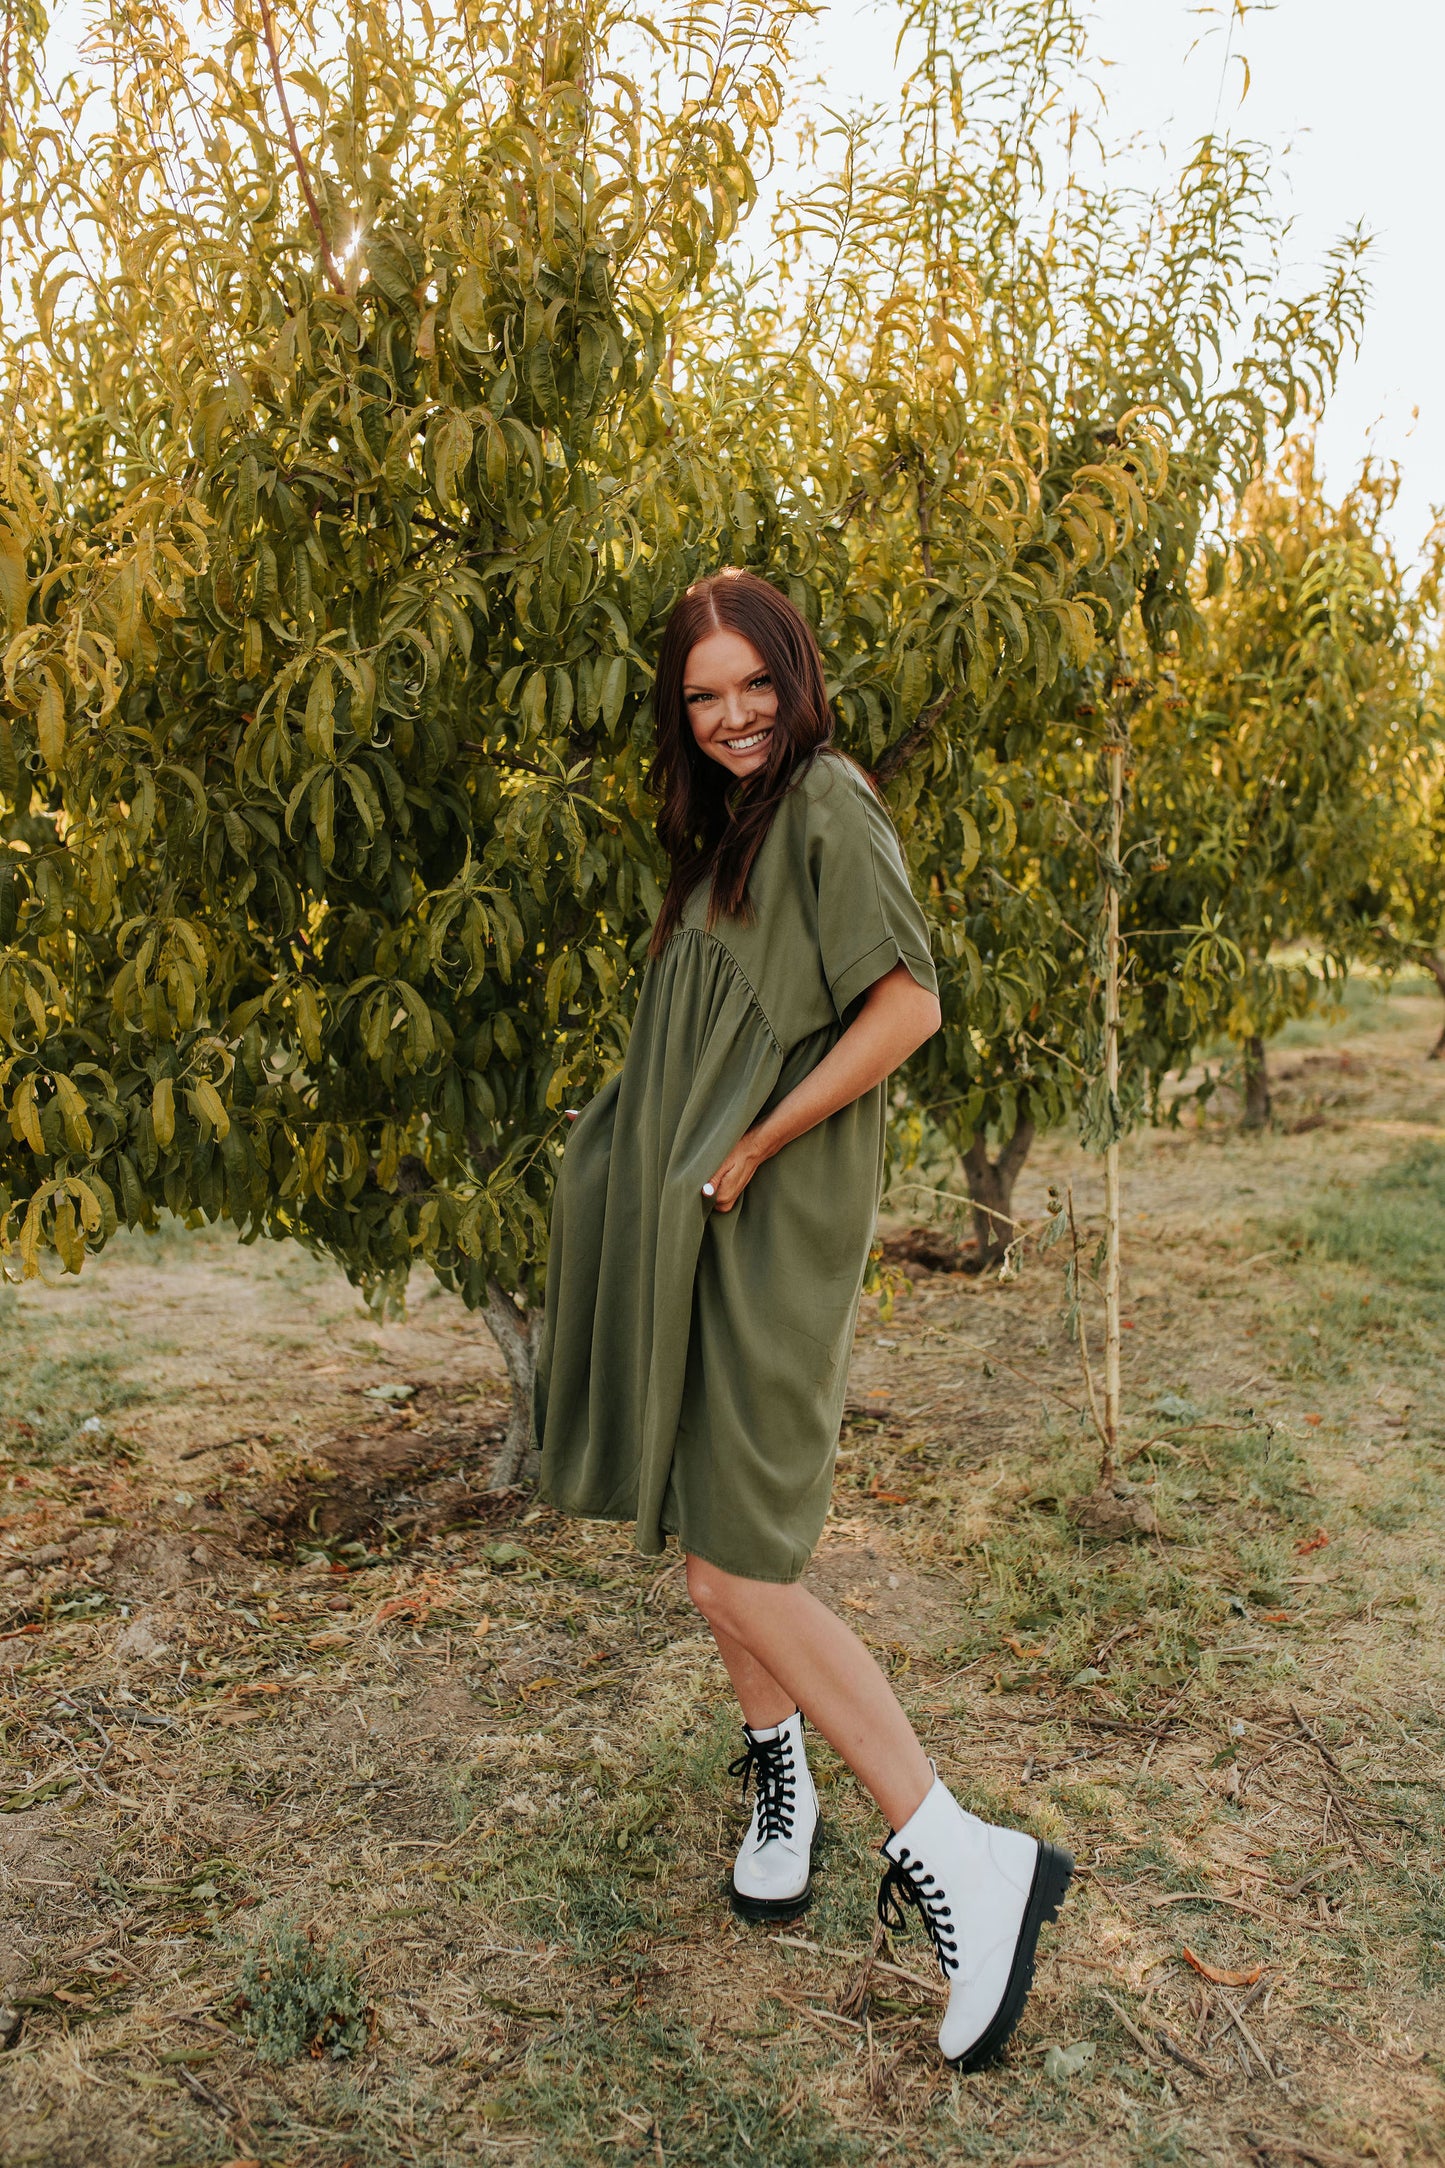 THE FALL FEELS BABYDOLL DRESS IN OLIVE